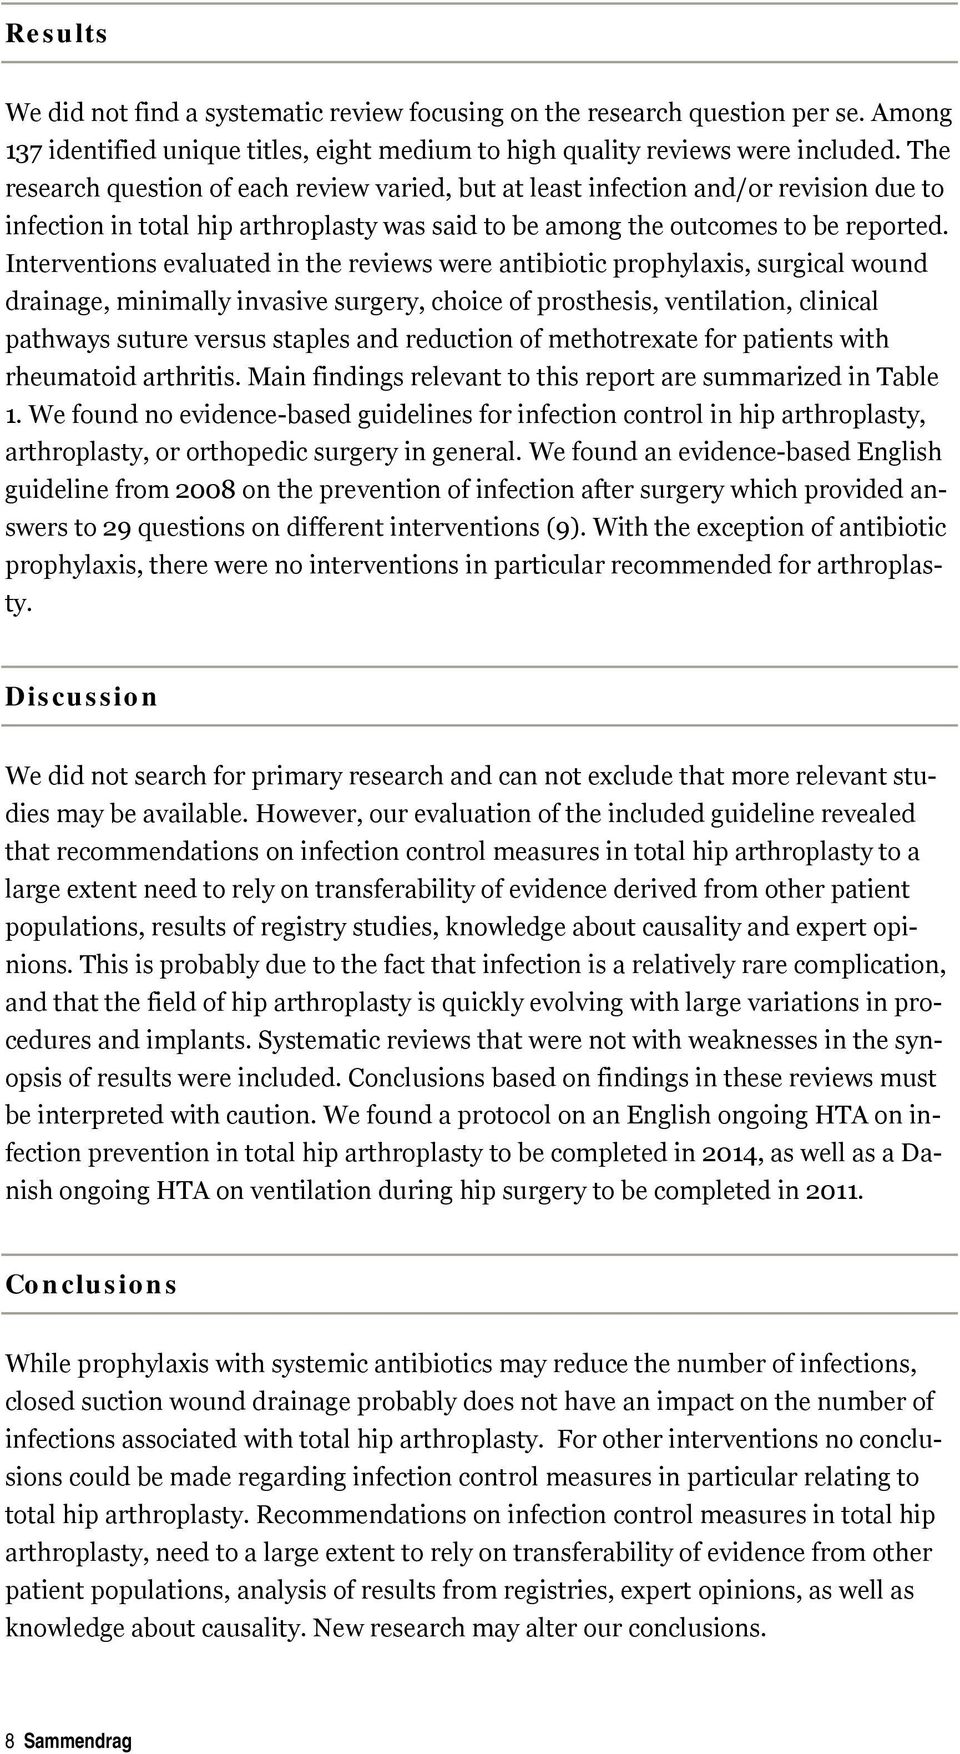 Interventions evaluated in the reviews were antibiotic prophylaxis, surgical wound drainage, minimally invasive surgery, choice of prosthesis, ventilation, clinical pathways suture versus staples and